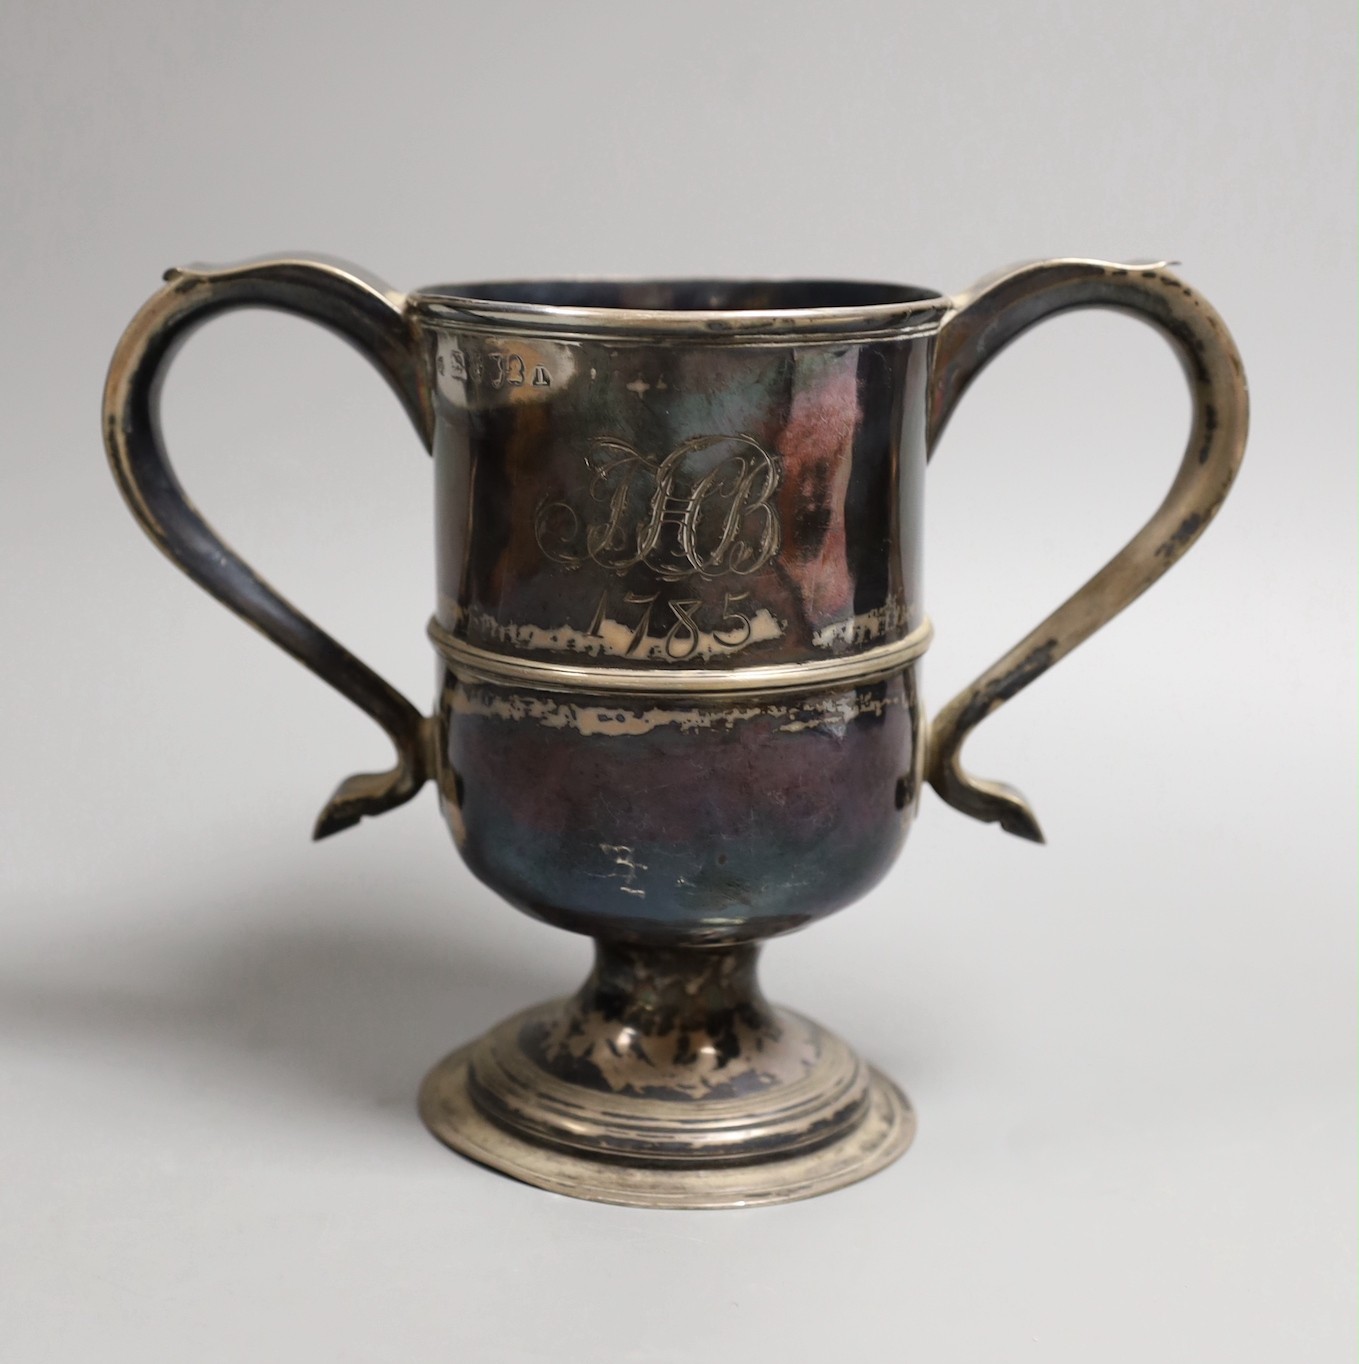 A George III provincial silver two handled pedestal cup by Dorothy Langlands, Newcastle, 1809, with later engraved initials and date, height 14.5cm, 11.9oz.